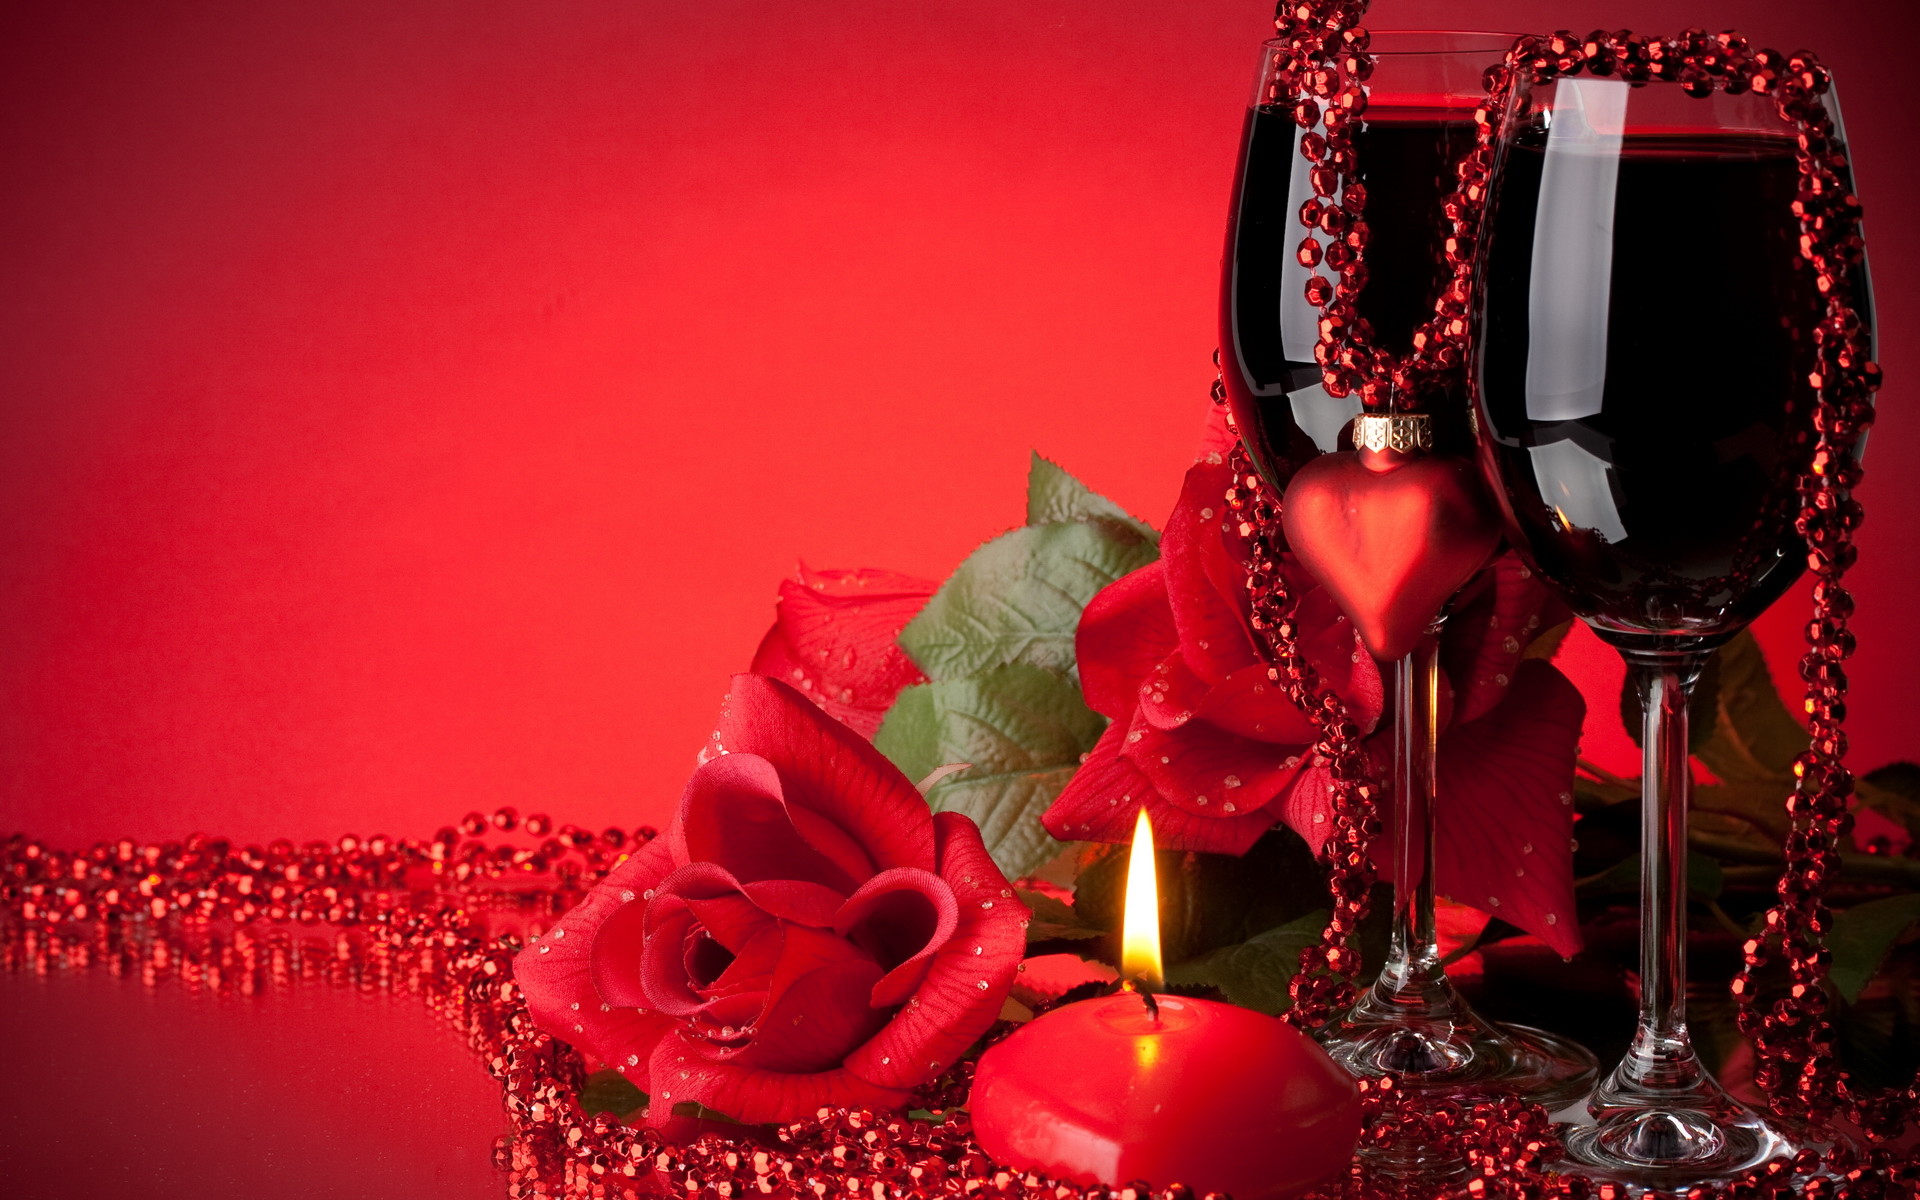 1920x1200 Download wallpaper: red Wine and Roses, download photo, wallpapers for  desktop